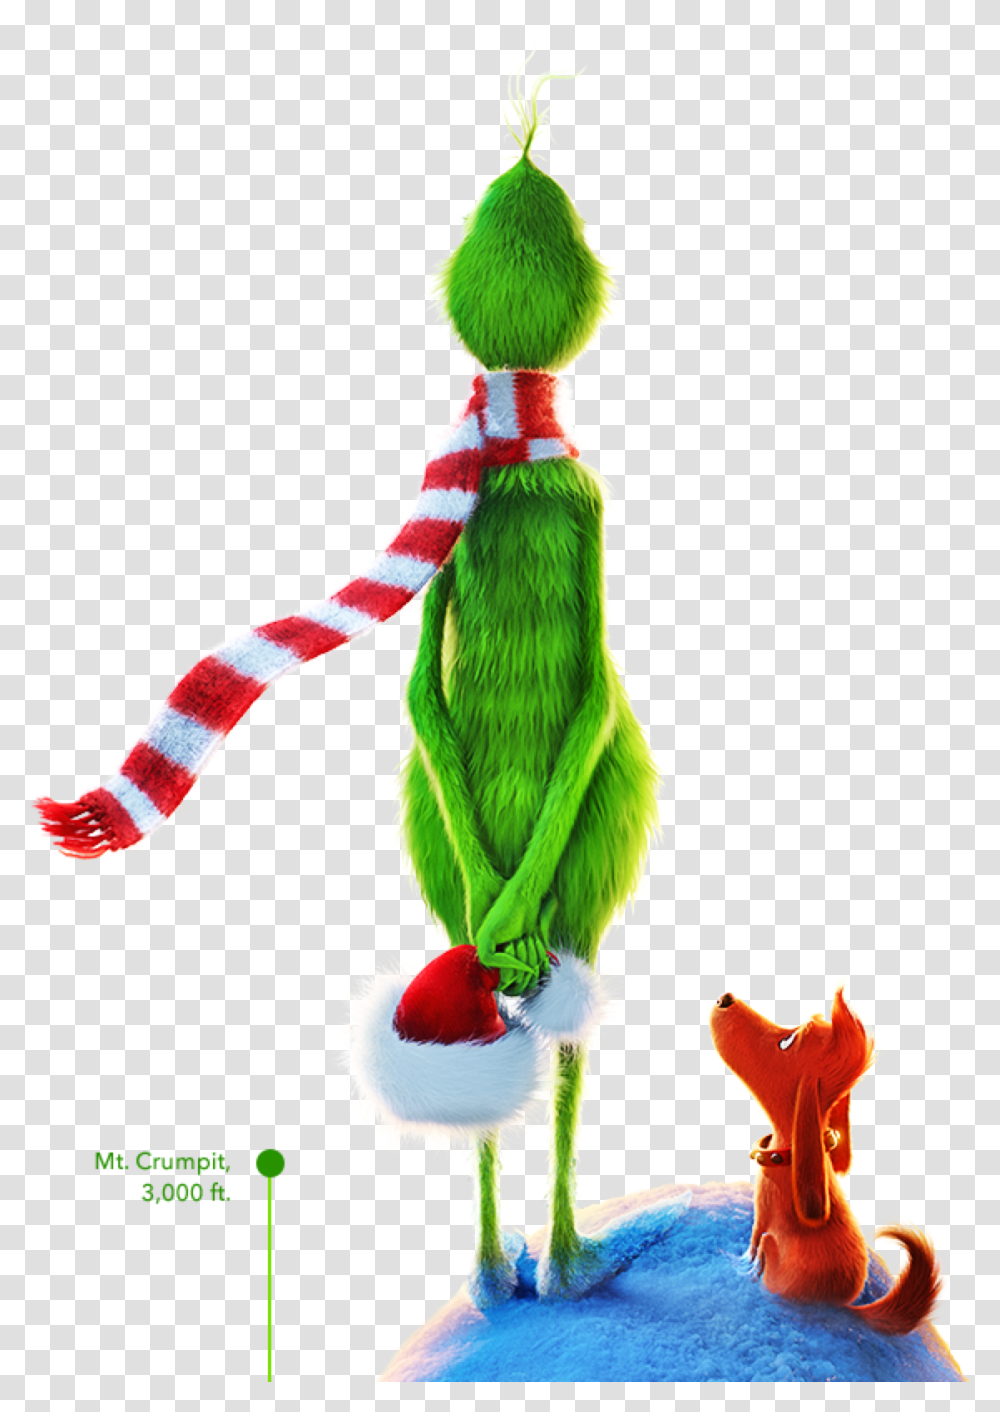 Max And The Grinch Scheming From Three Thousand Feet Figurine, Animal, Elf Transparent Png